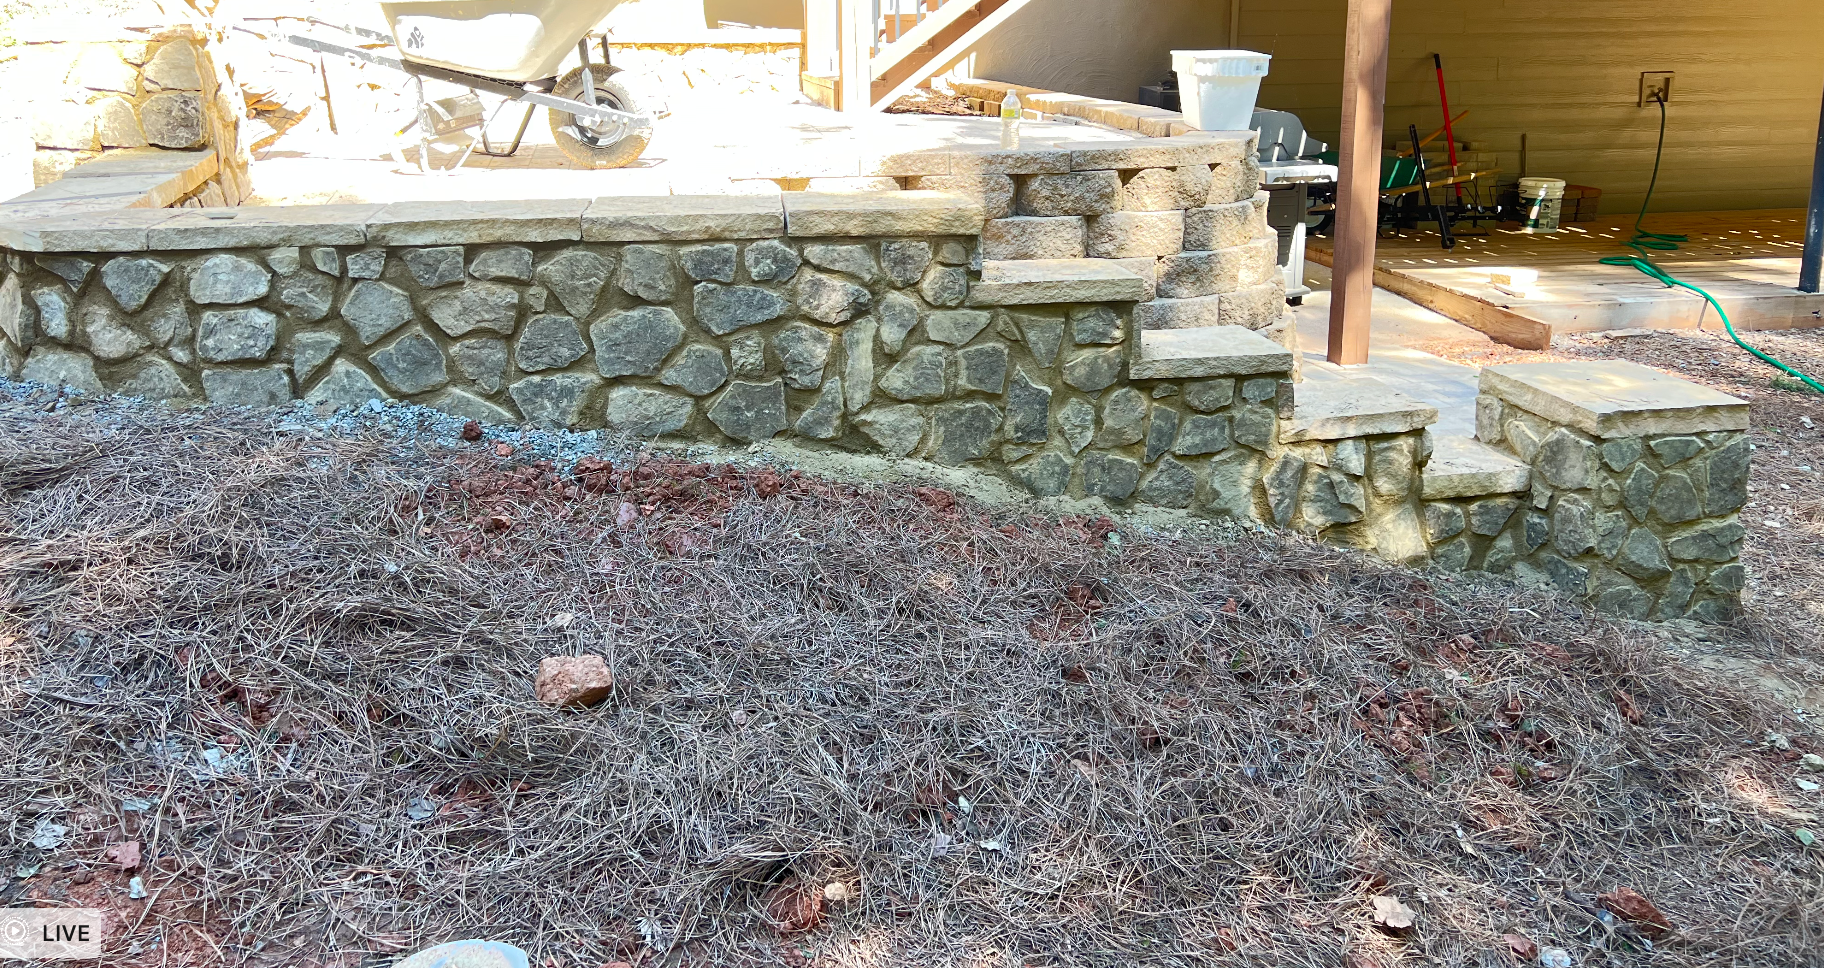 Work in progress by RC Landscapes featuring stone wall construction and pine straw mulching.